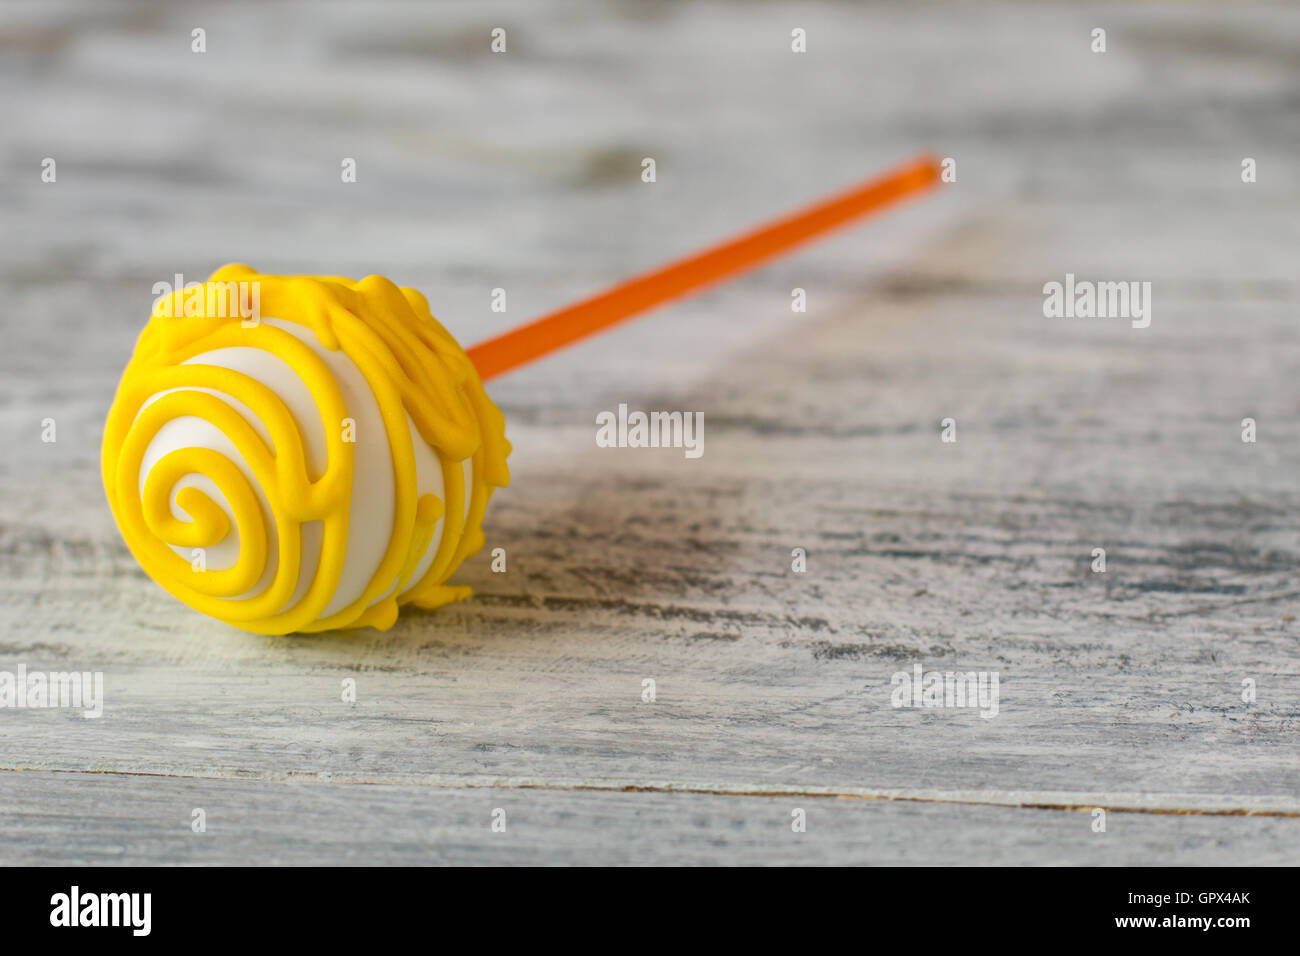 Cake pop with yellow icing. Stock Photo